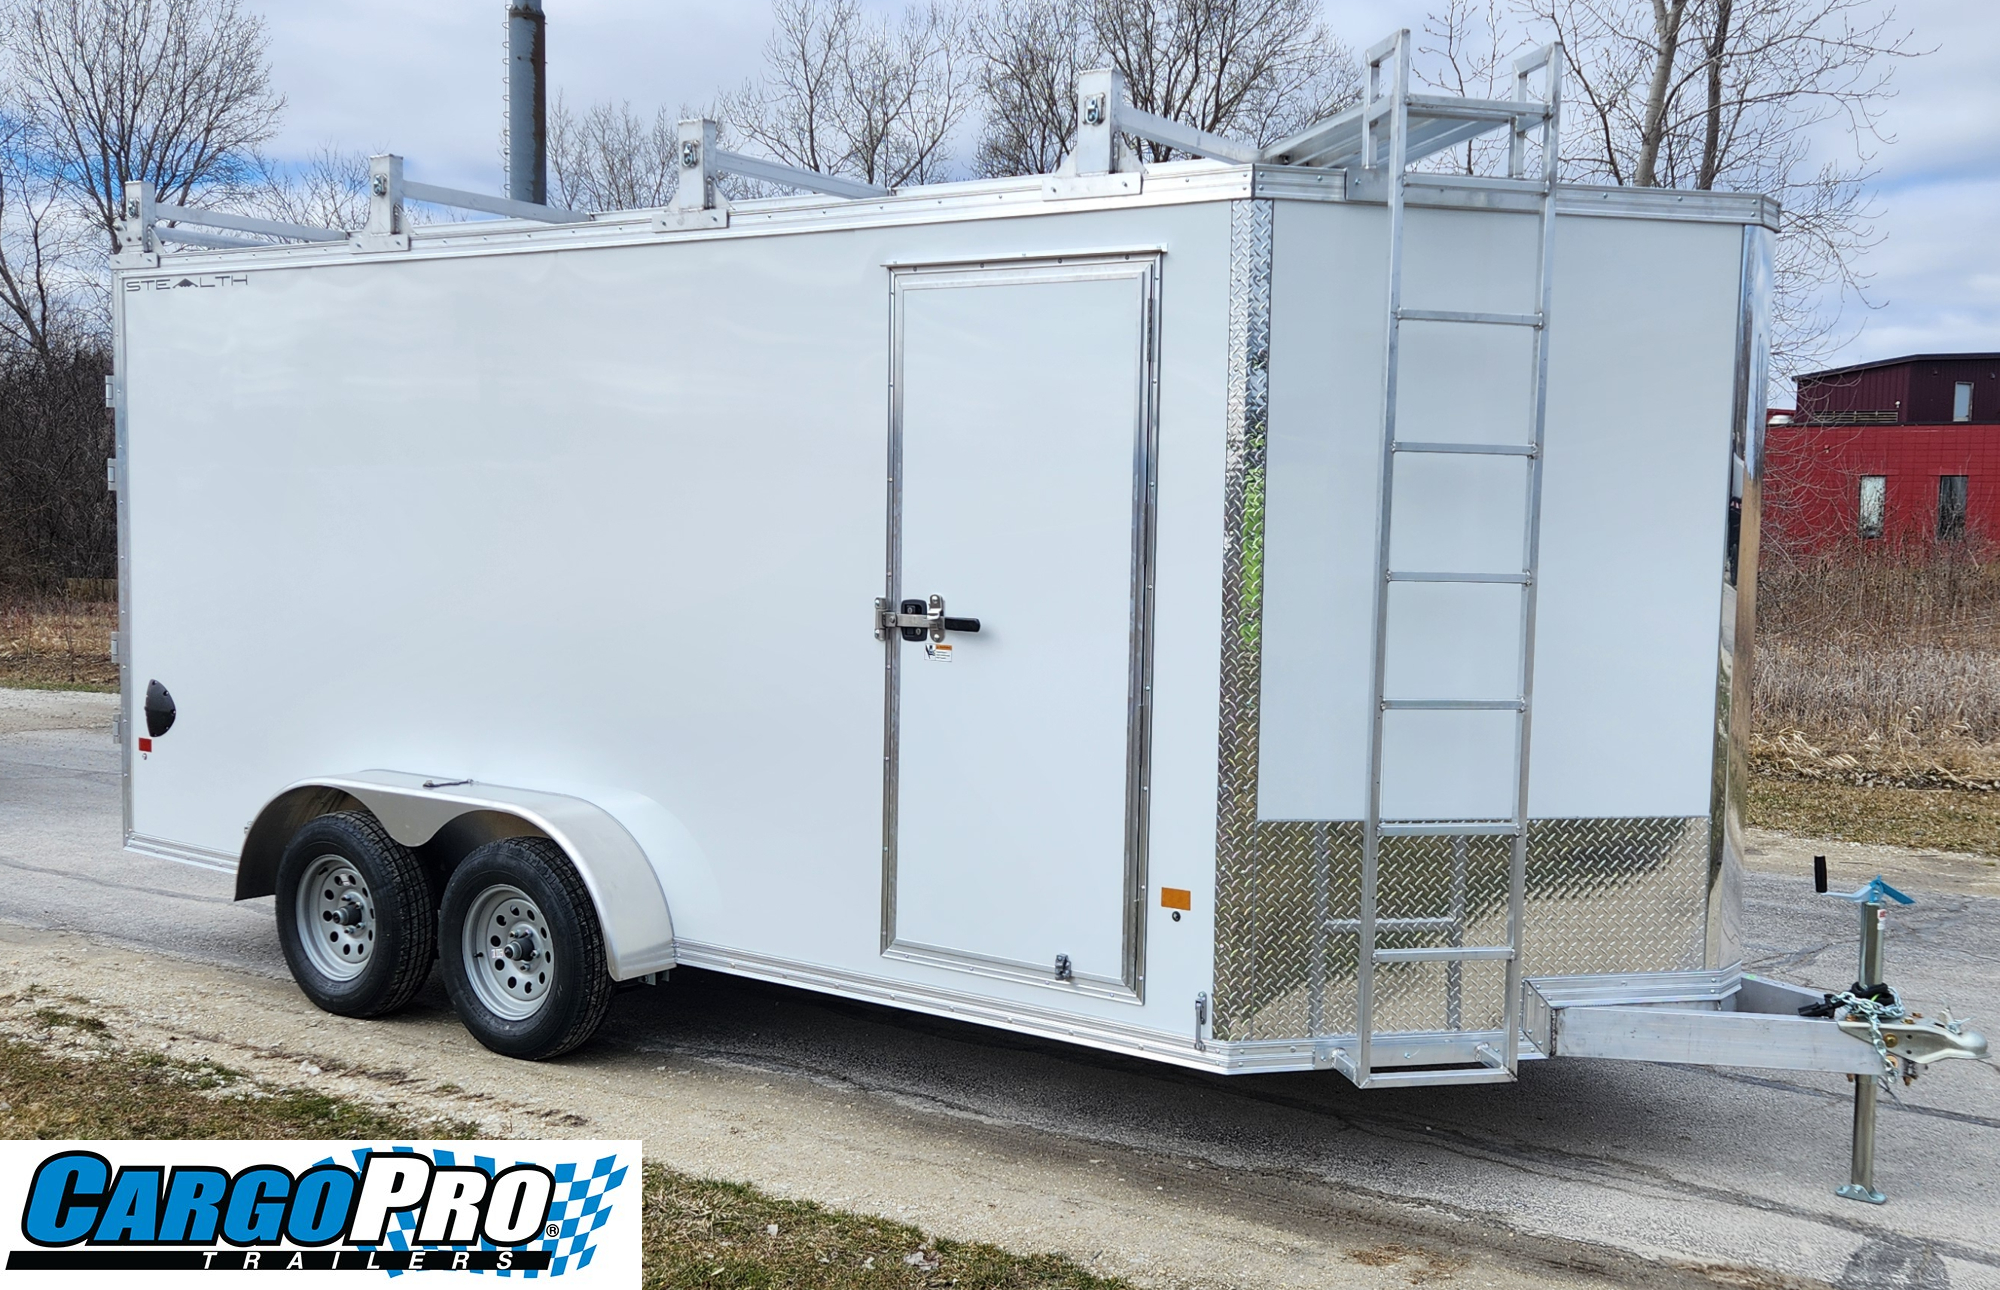 CargoPro Stealth 7 X 16 Aluminum Frame Tandem Axle Contractor Cargo Trailer Double Rear Doors, 79 inch Interior Height- White